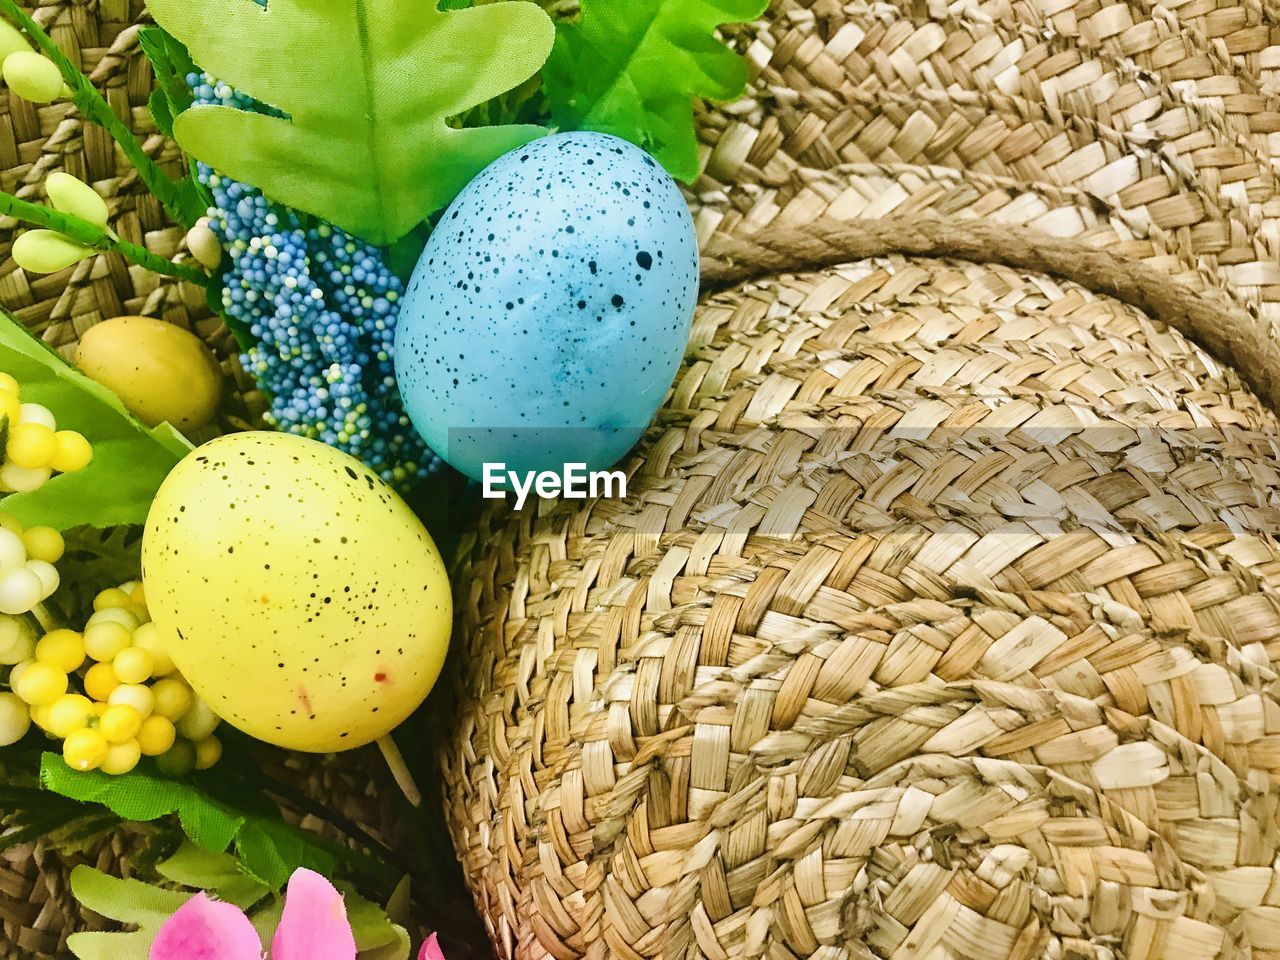 HIGH ANGLE VIEW OF MULTI COLORED EGGS IN WICKER BASKET